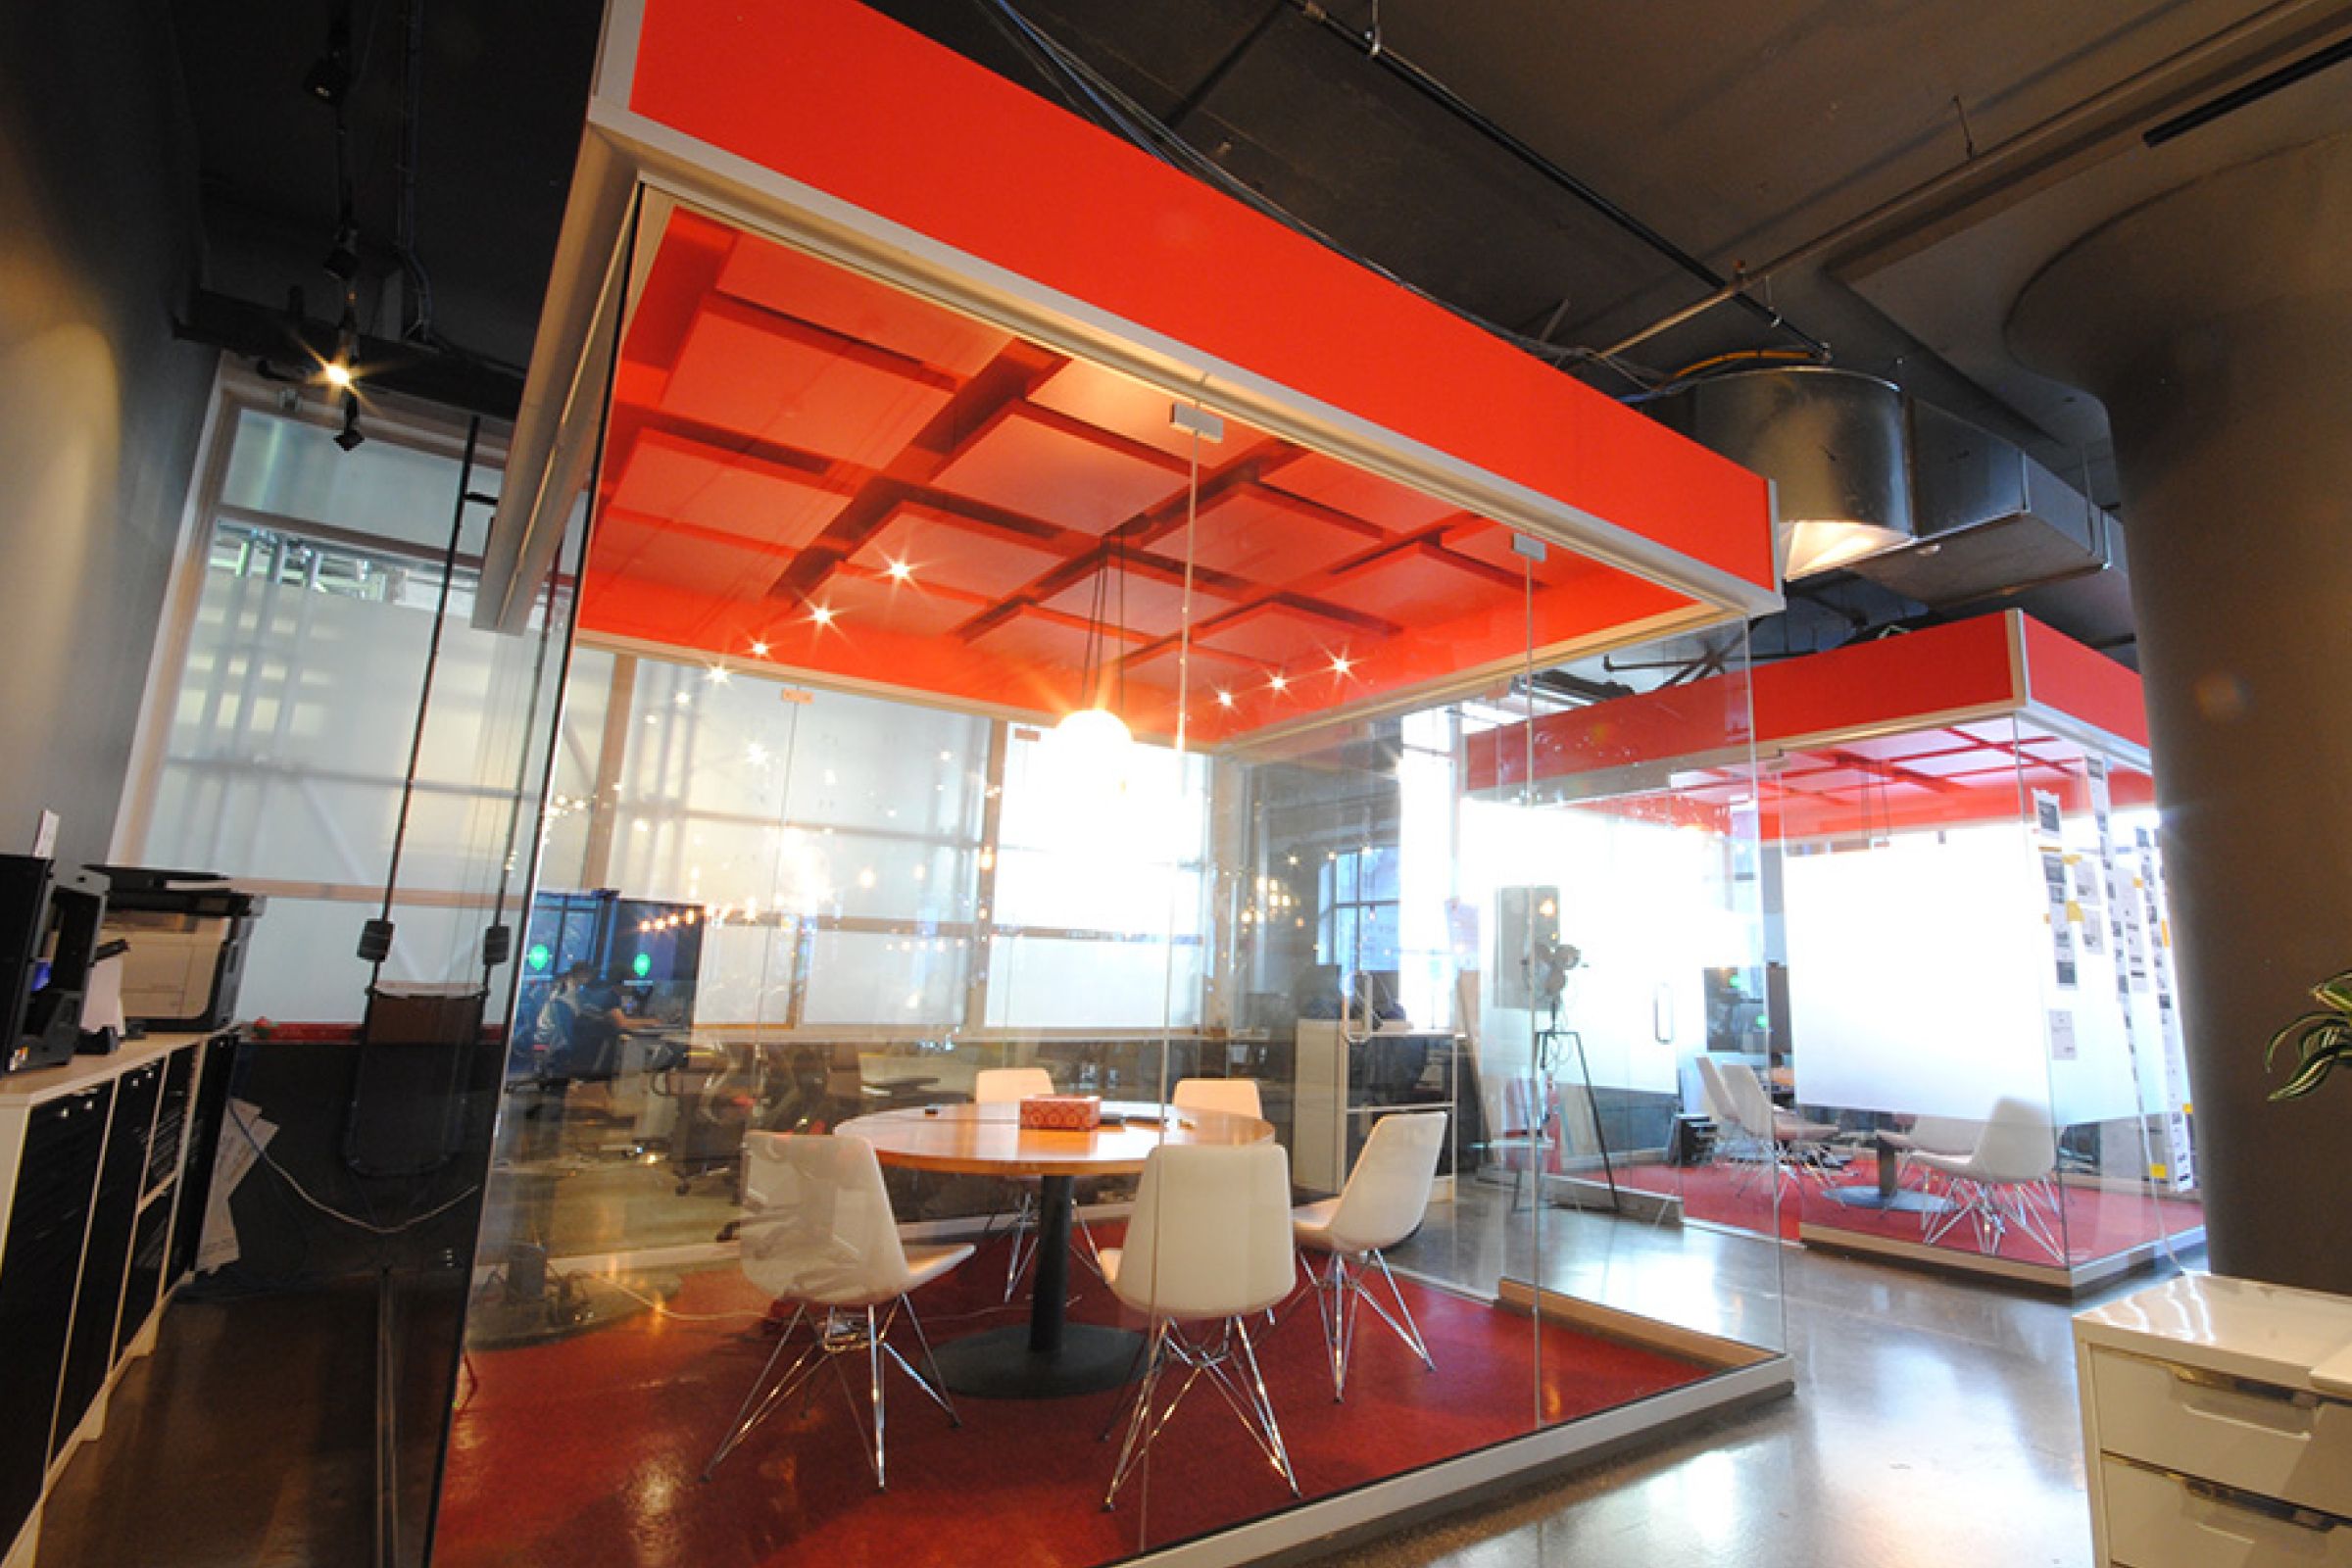 Meeting room with glass walls and red acoustic panels on a red ceiling